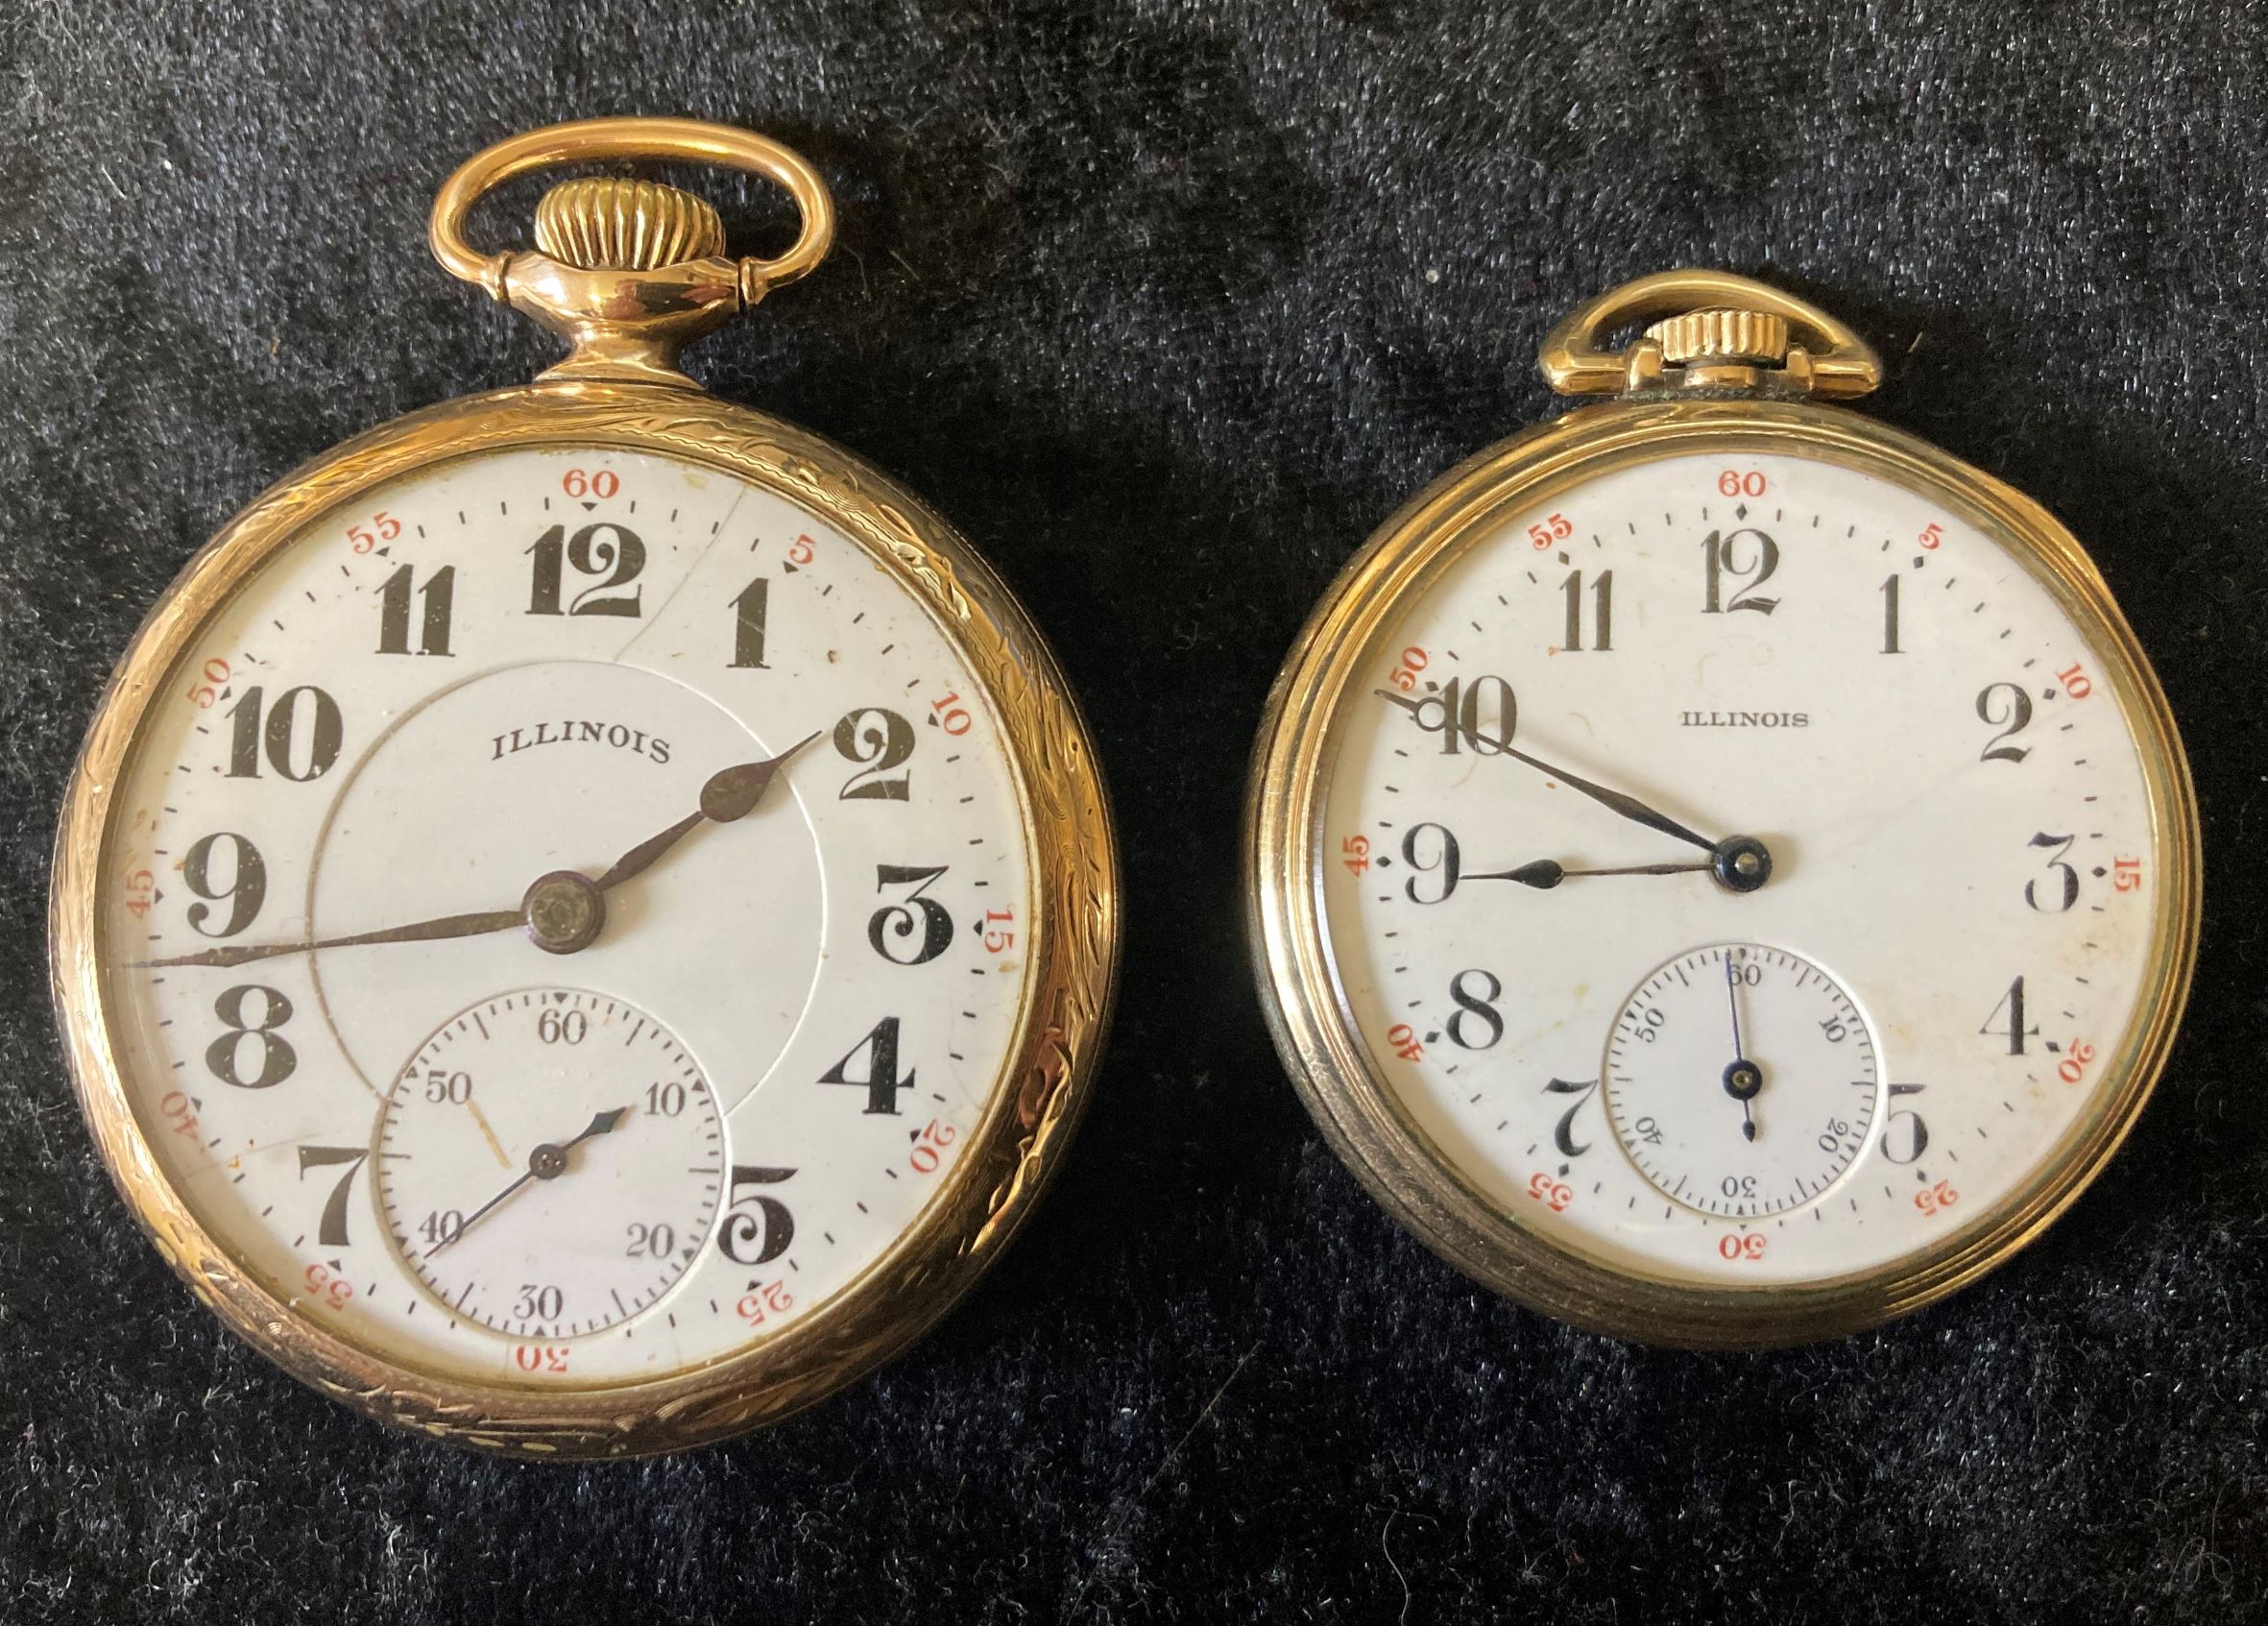 Illinois screw case gold plated pocket watch (running) & a small Illinois gold plated pocket